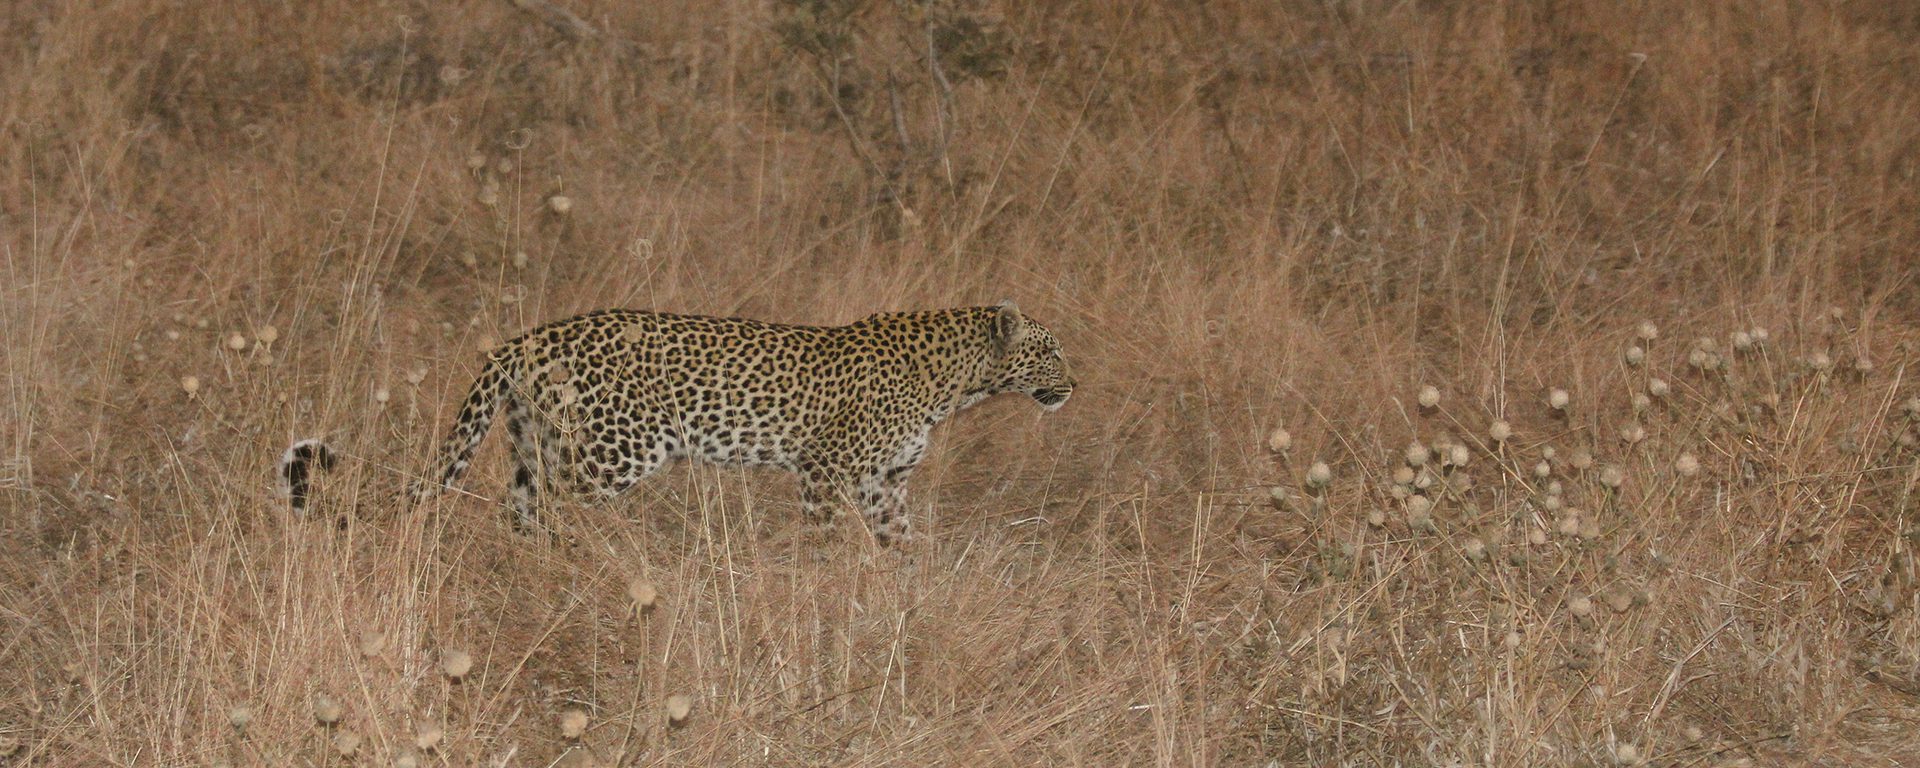 g2a_botswana_the-resident-leopard-we-tracked-her-for-2-days-2savute